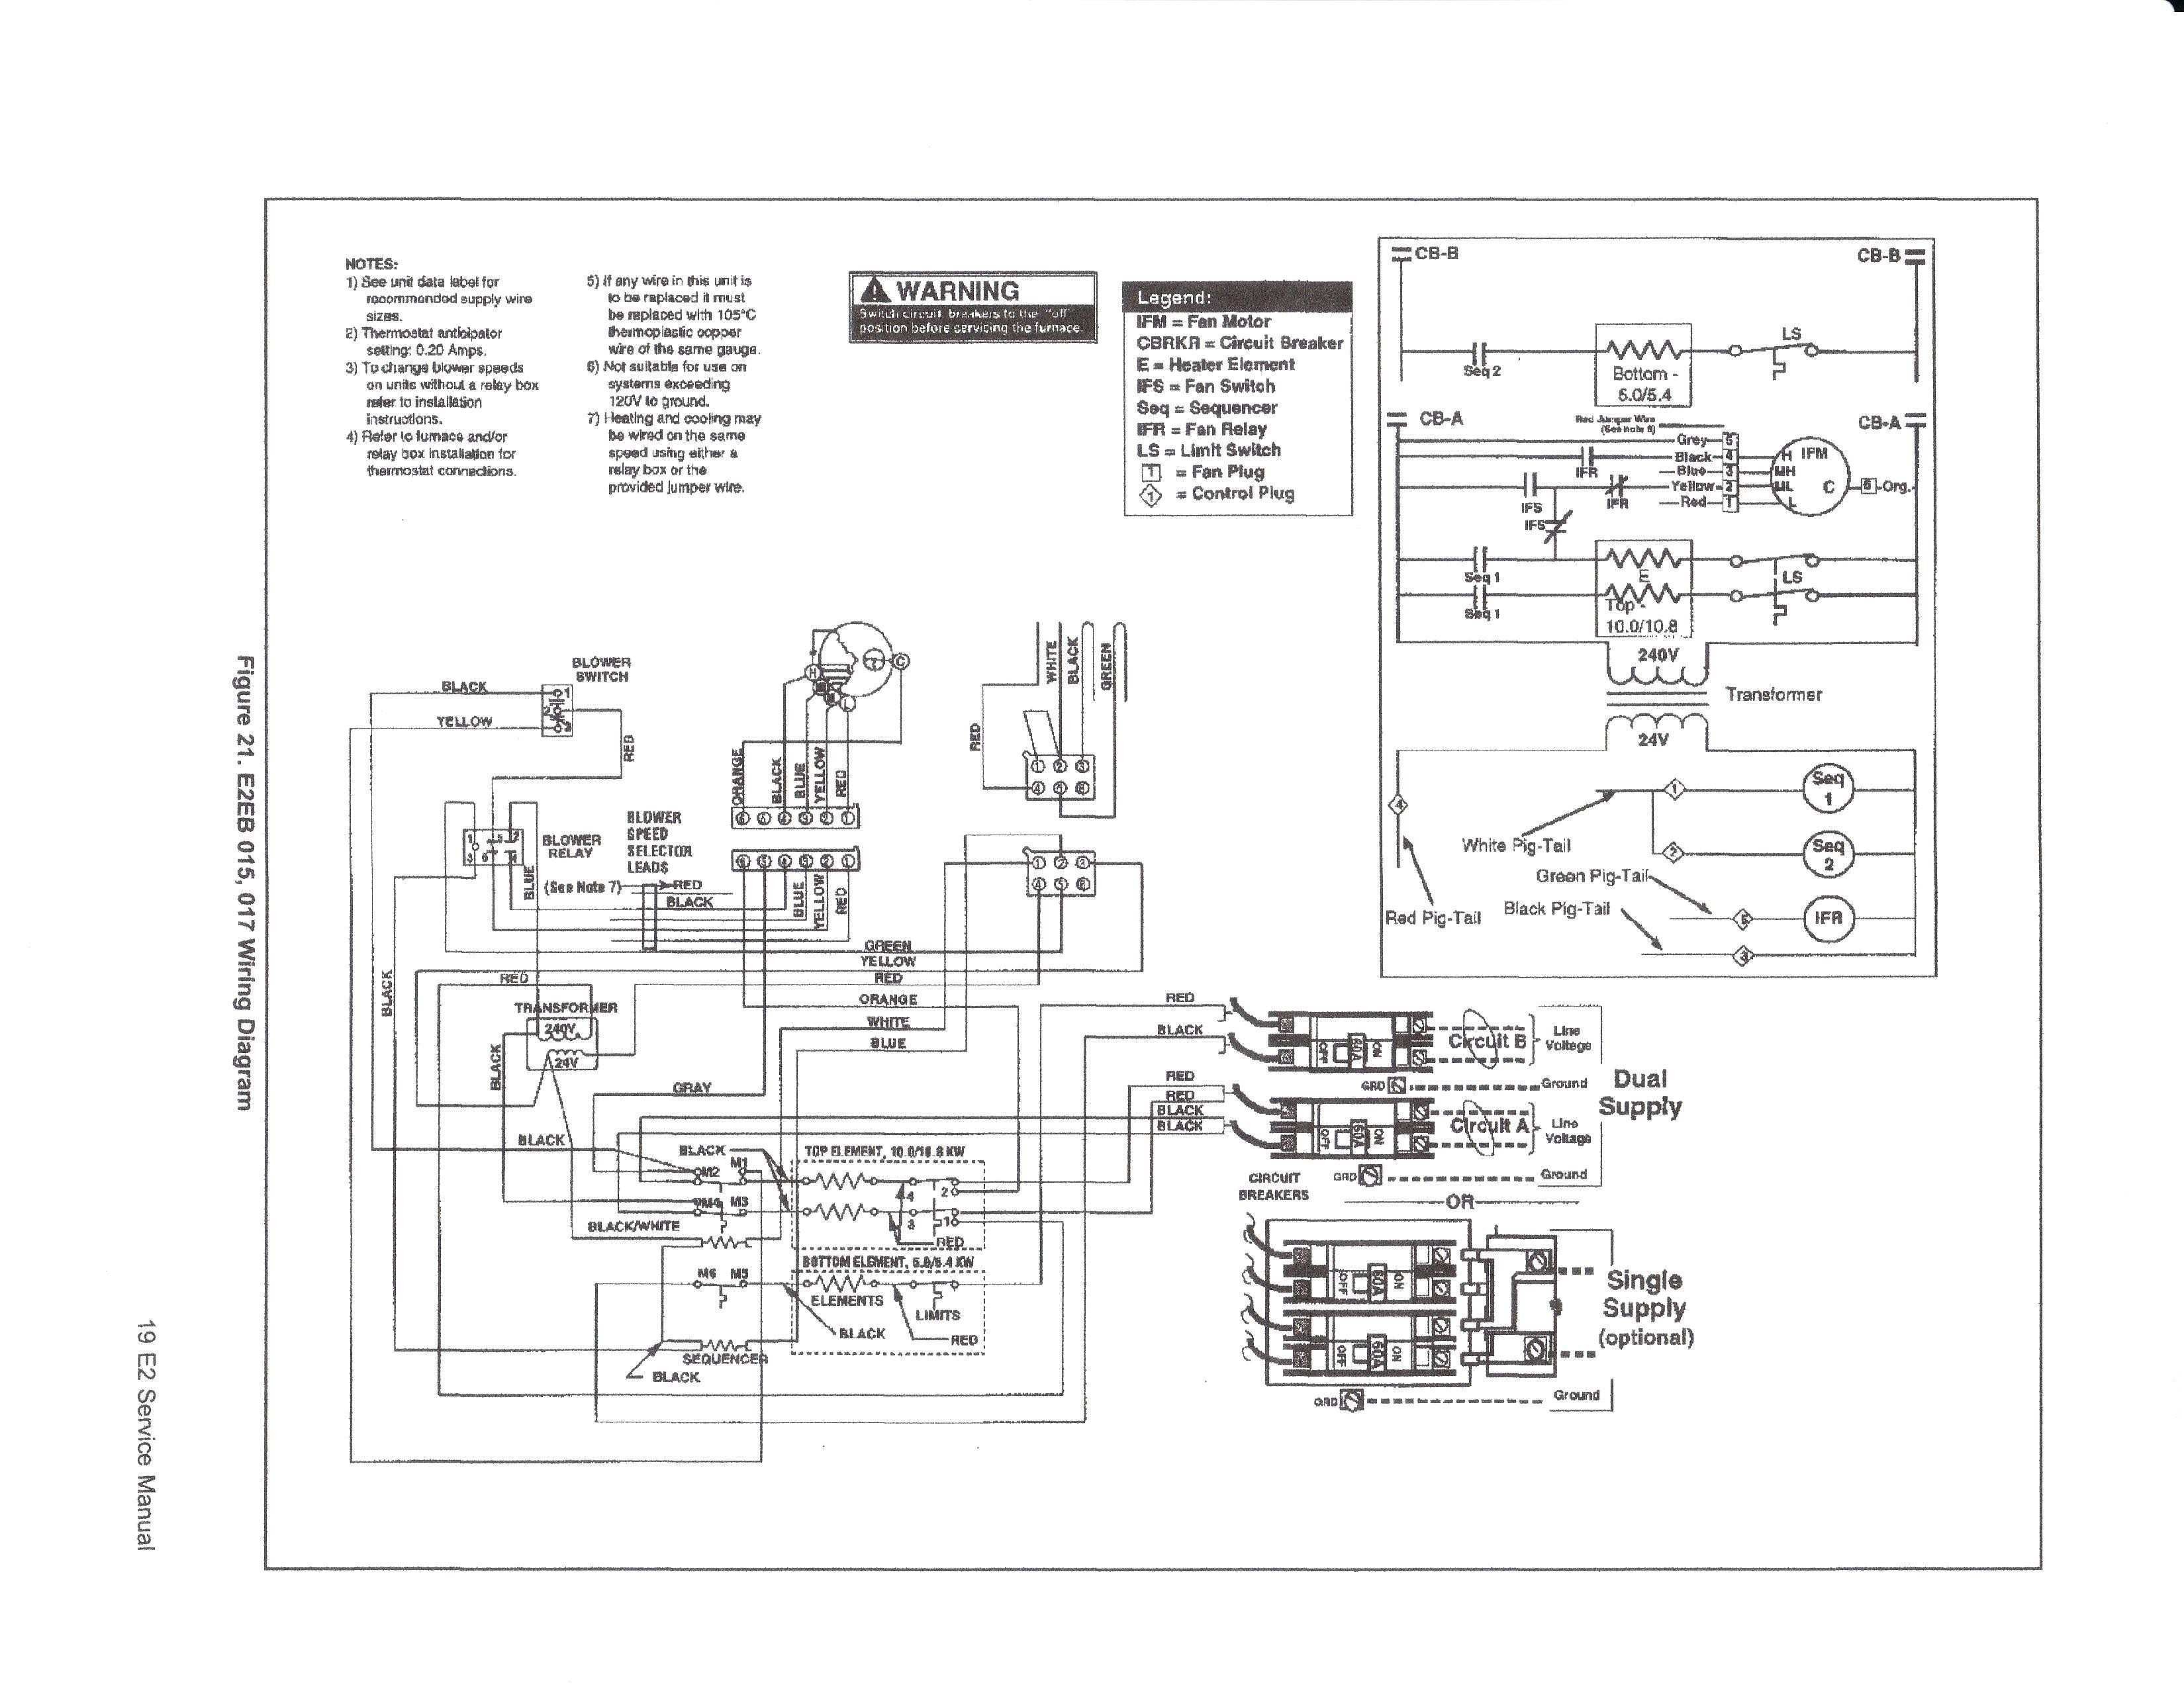 Wiring Diagrams For Central Heating New Awesome Wiring Diagram For Thermostat Diagram